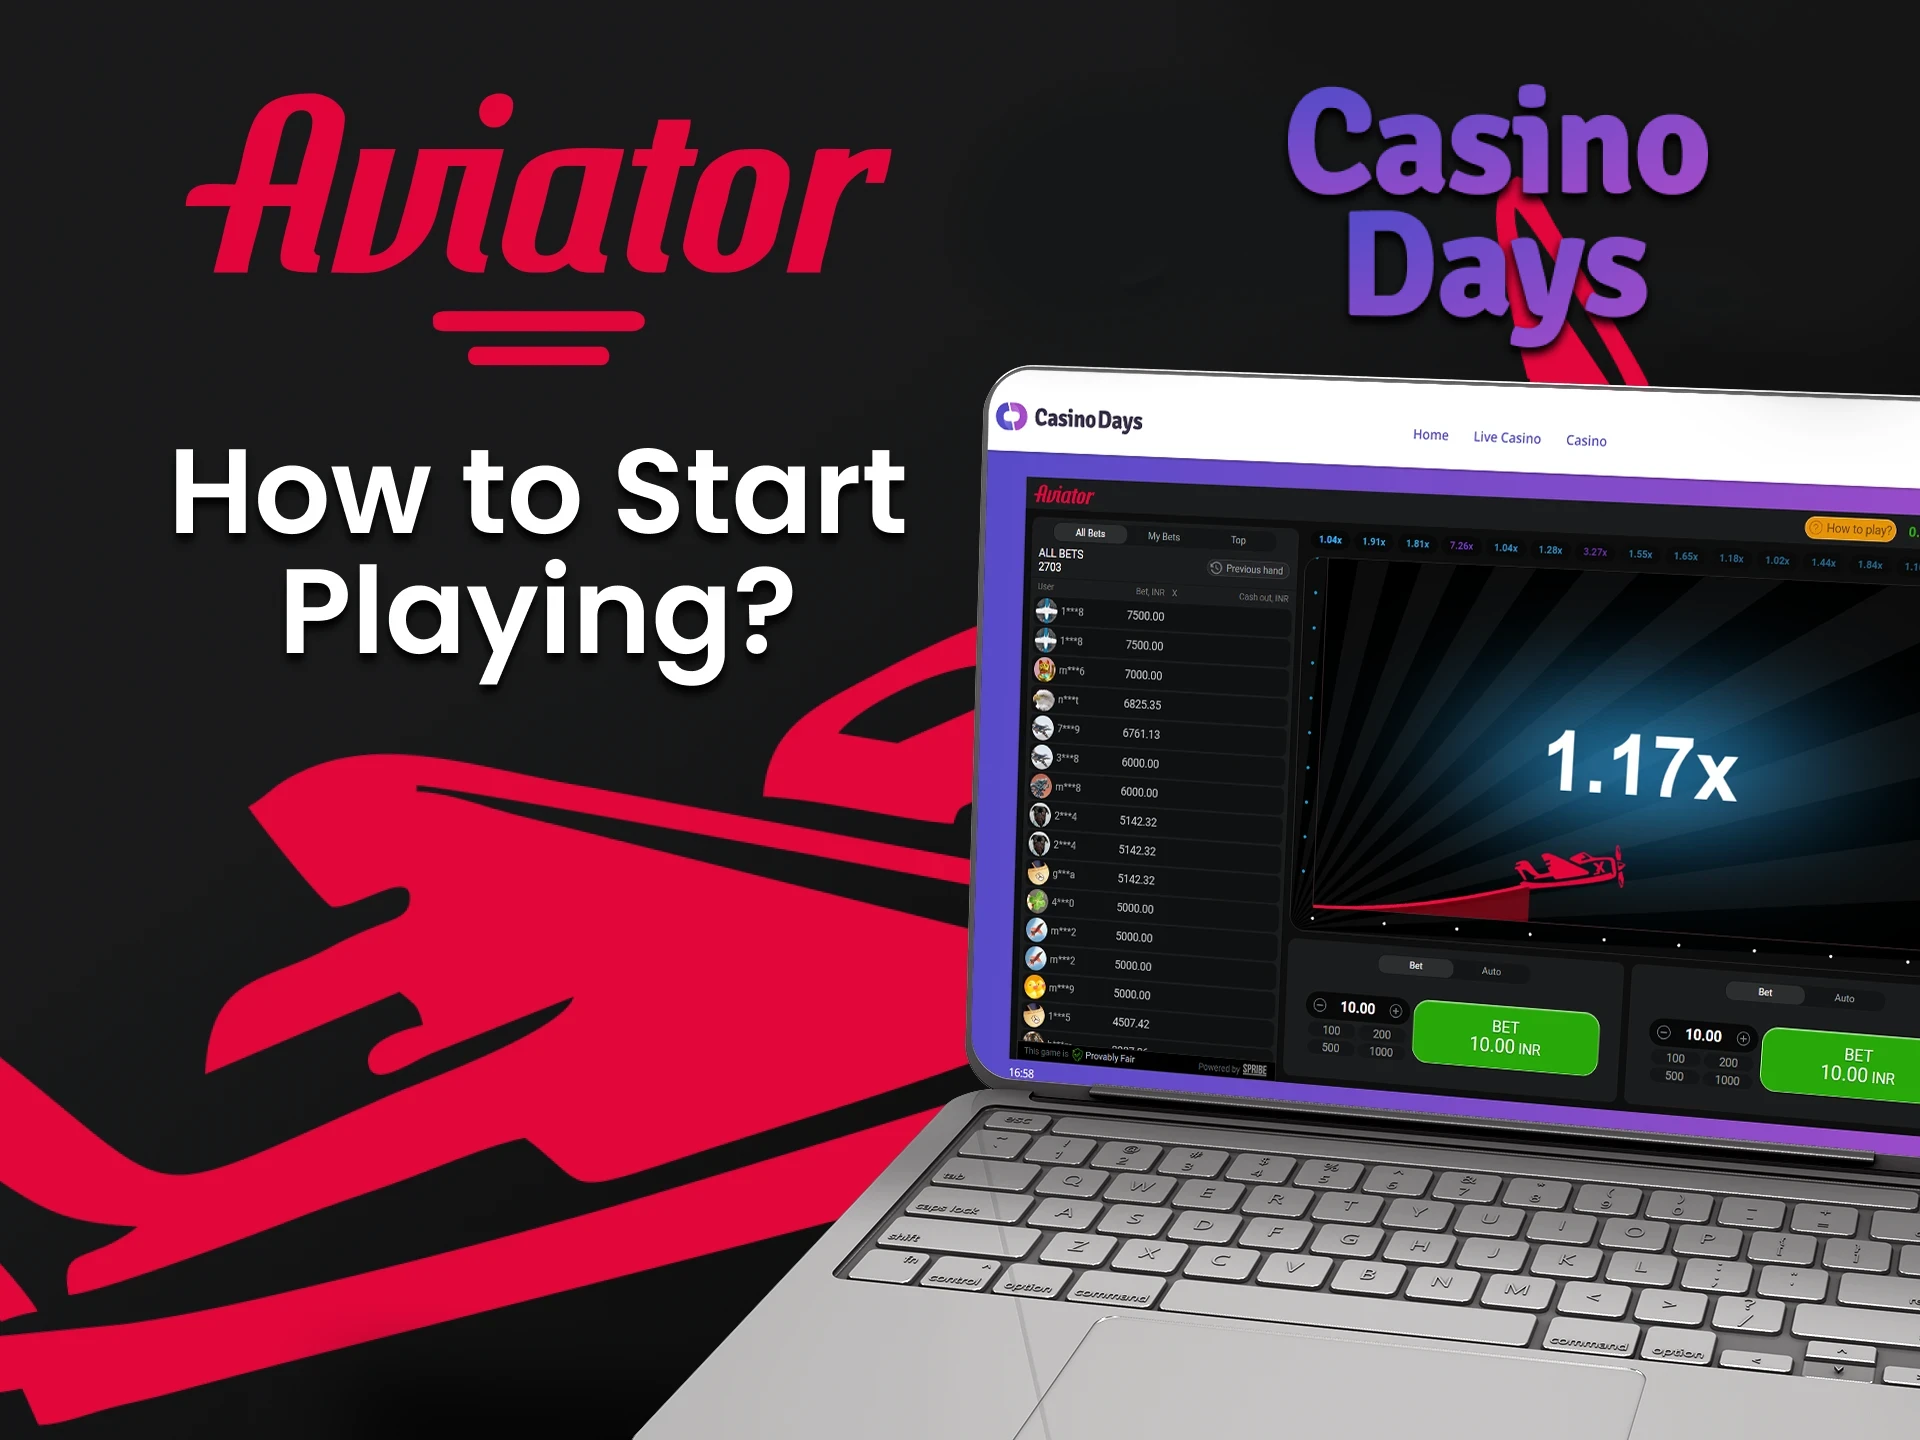 We will tell you how to start playing Aviator at Casino Days.